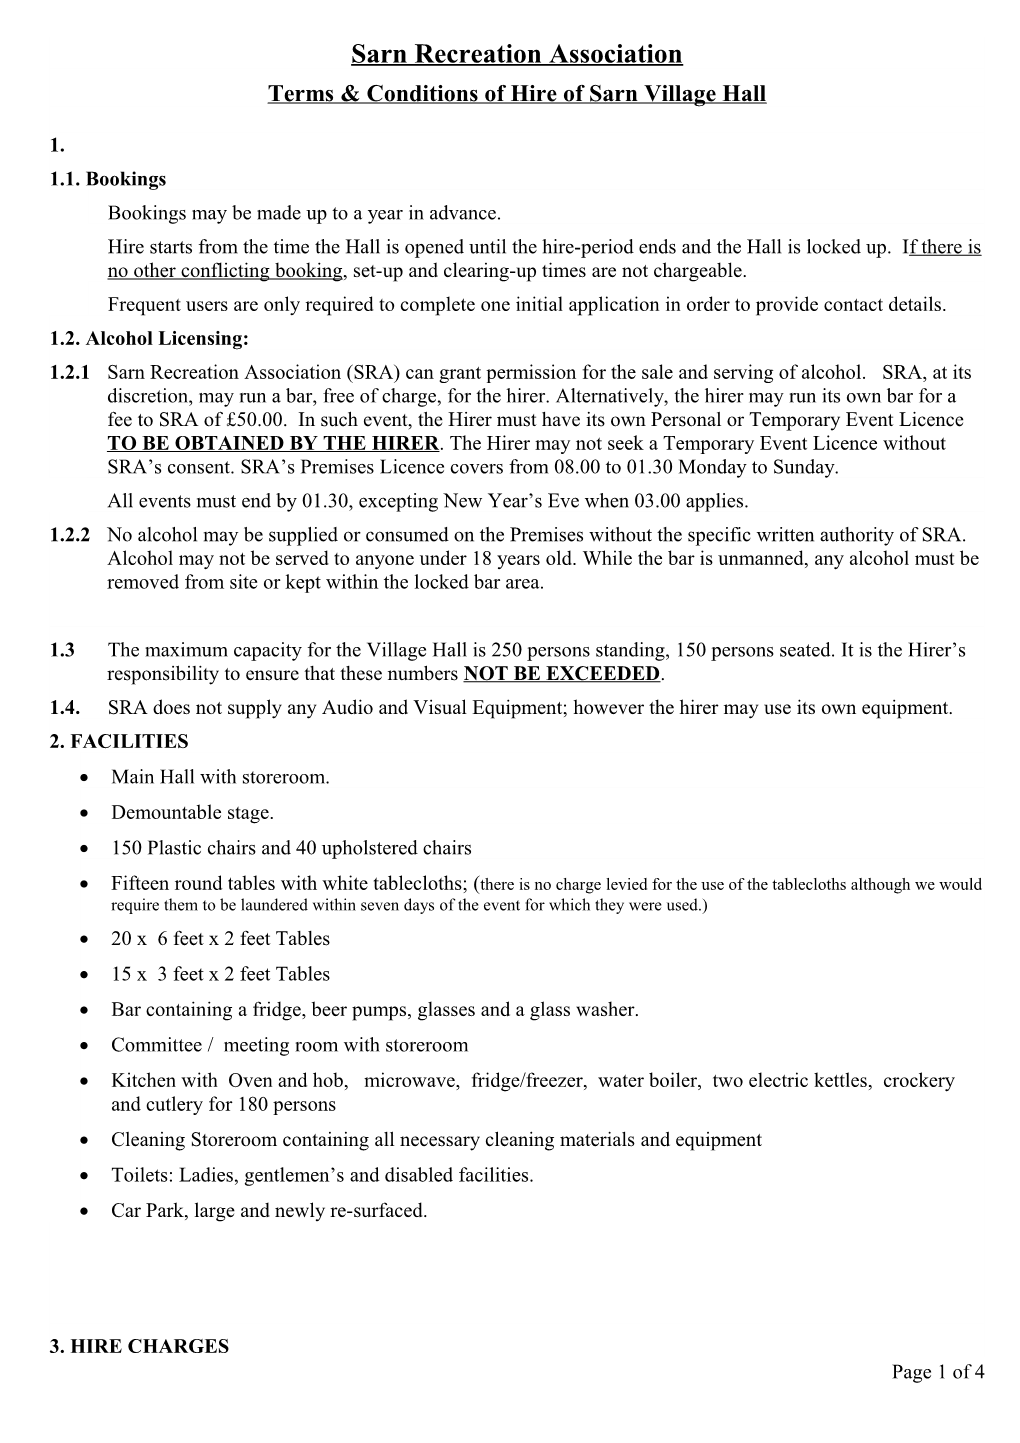 Terms & Conditions of Hire of Sarn Village Hall